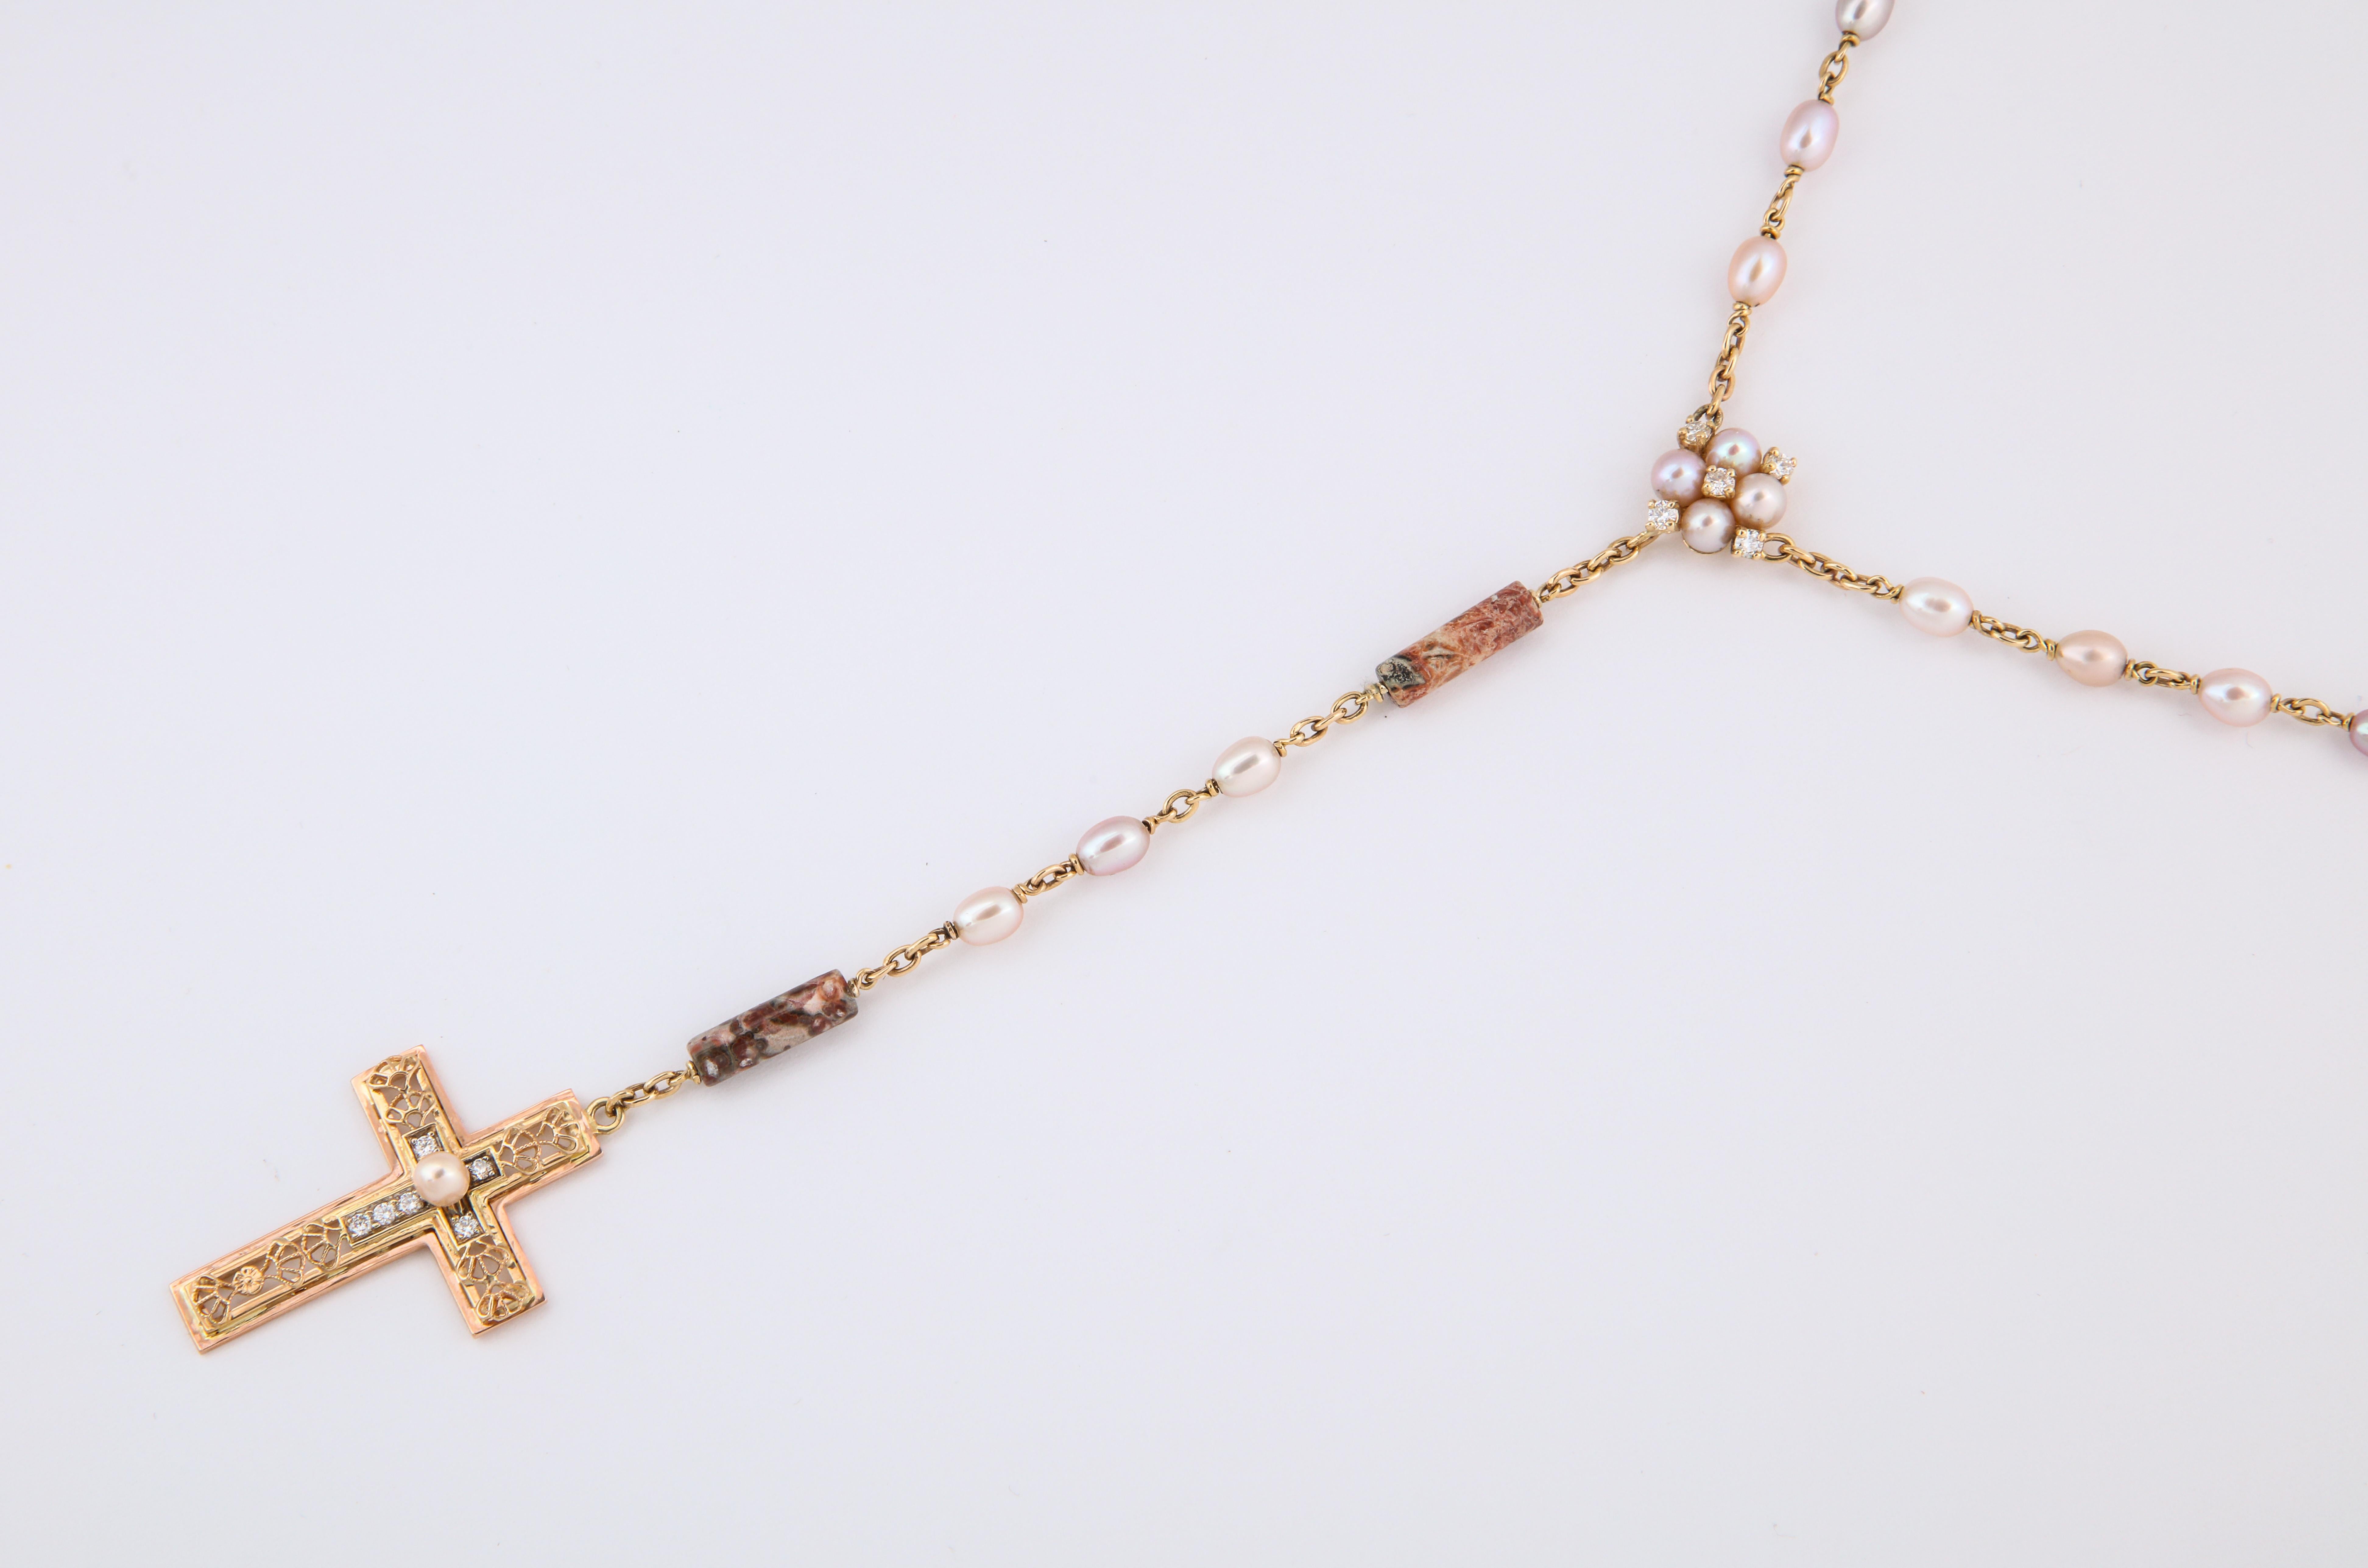 One of a kind! A newly created traditional rosary fashioned with a vintage 14K gold filigree cross suspended from a chain of 14K yellow gold,  jasper beads, fresh water natural color pearls and diamond accents makes for a very special gift. 